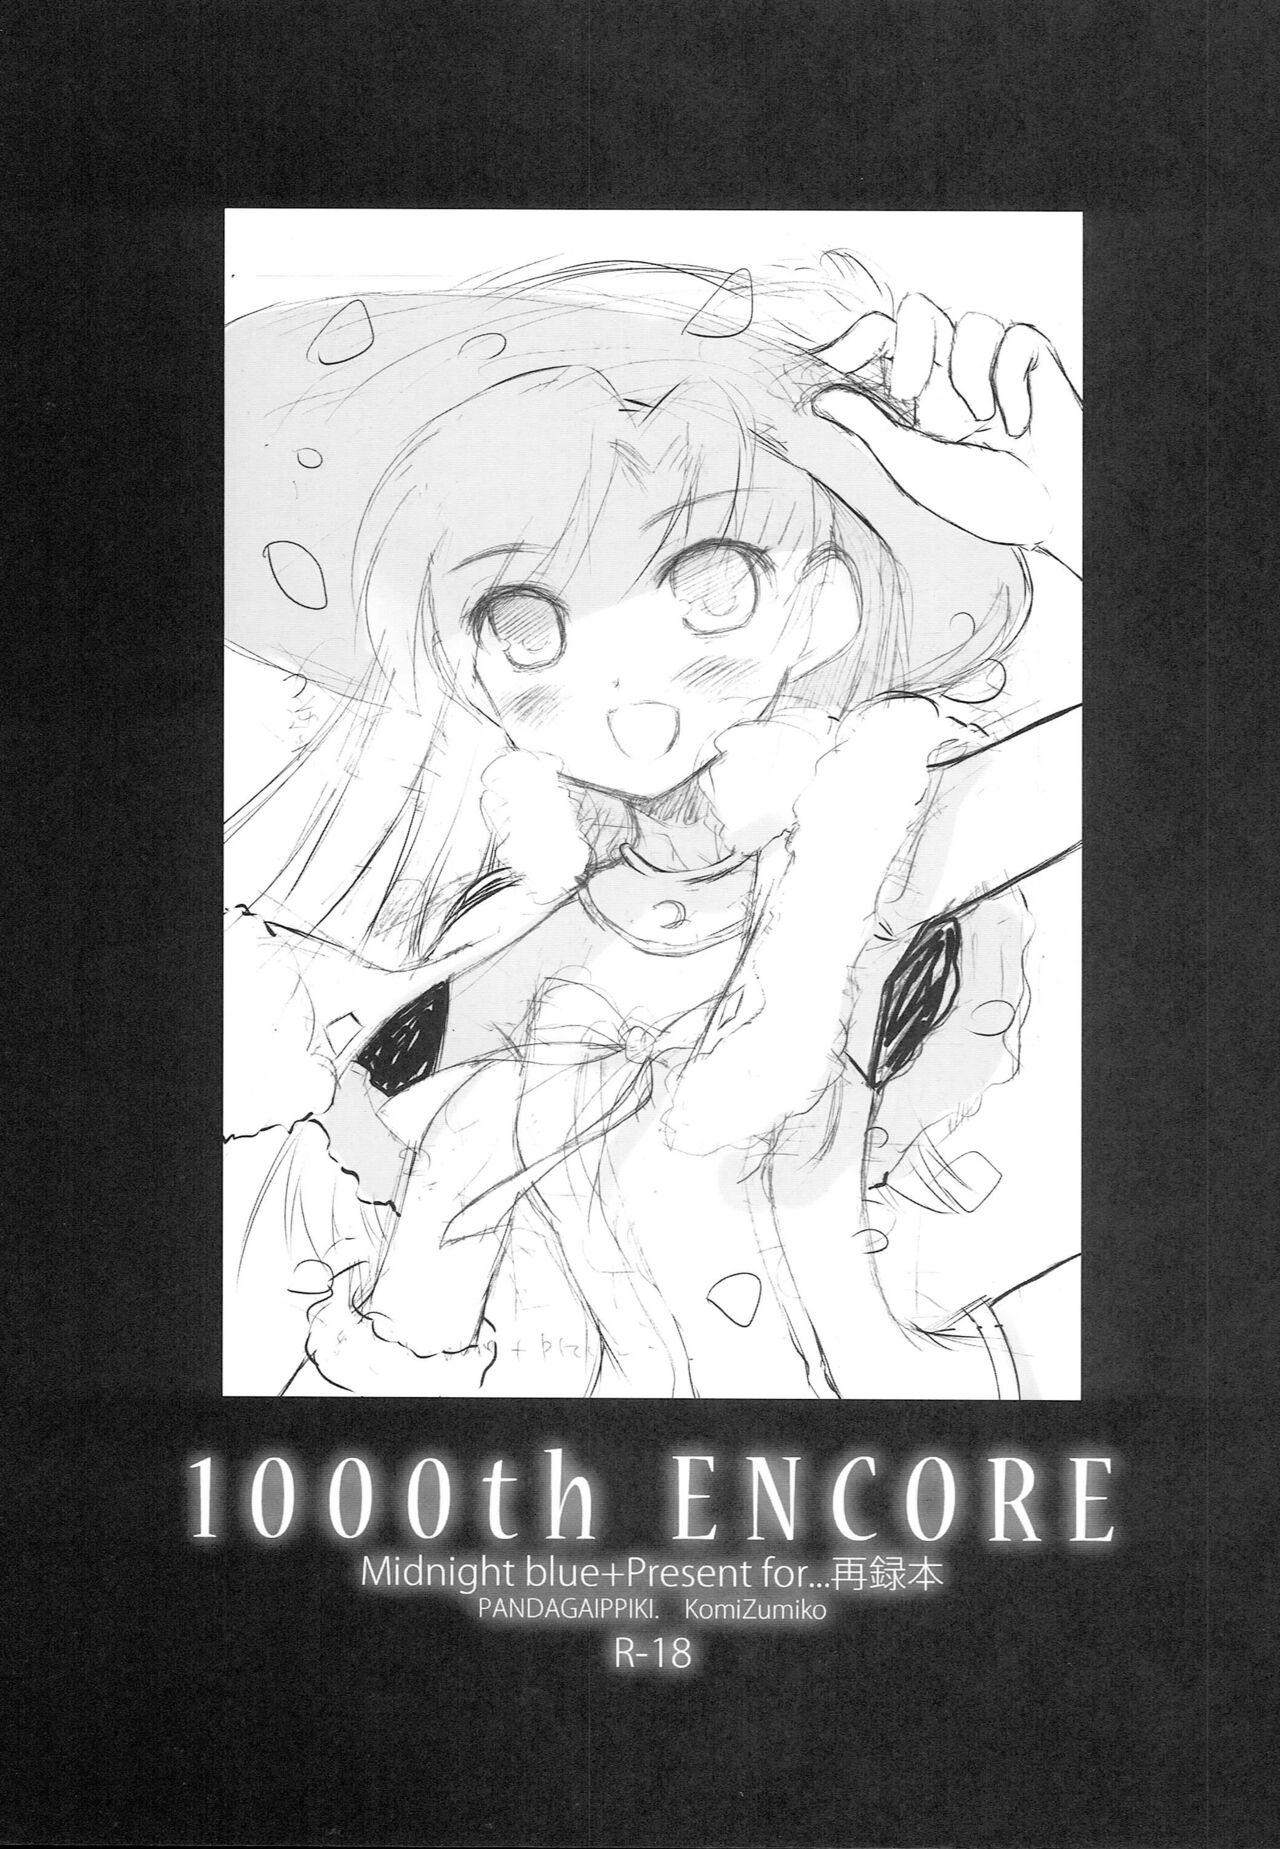 Mofos 1000th ENCORE - The idolmaster Humiliation - Page 2